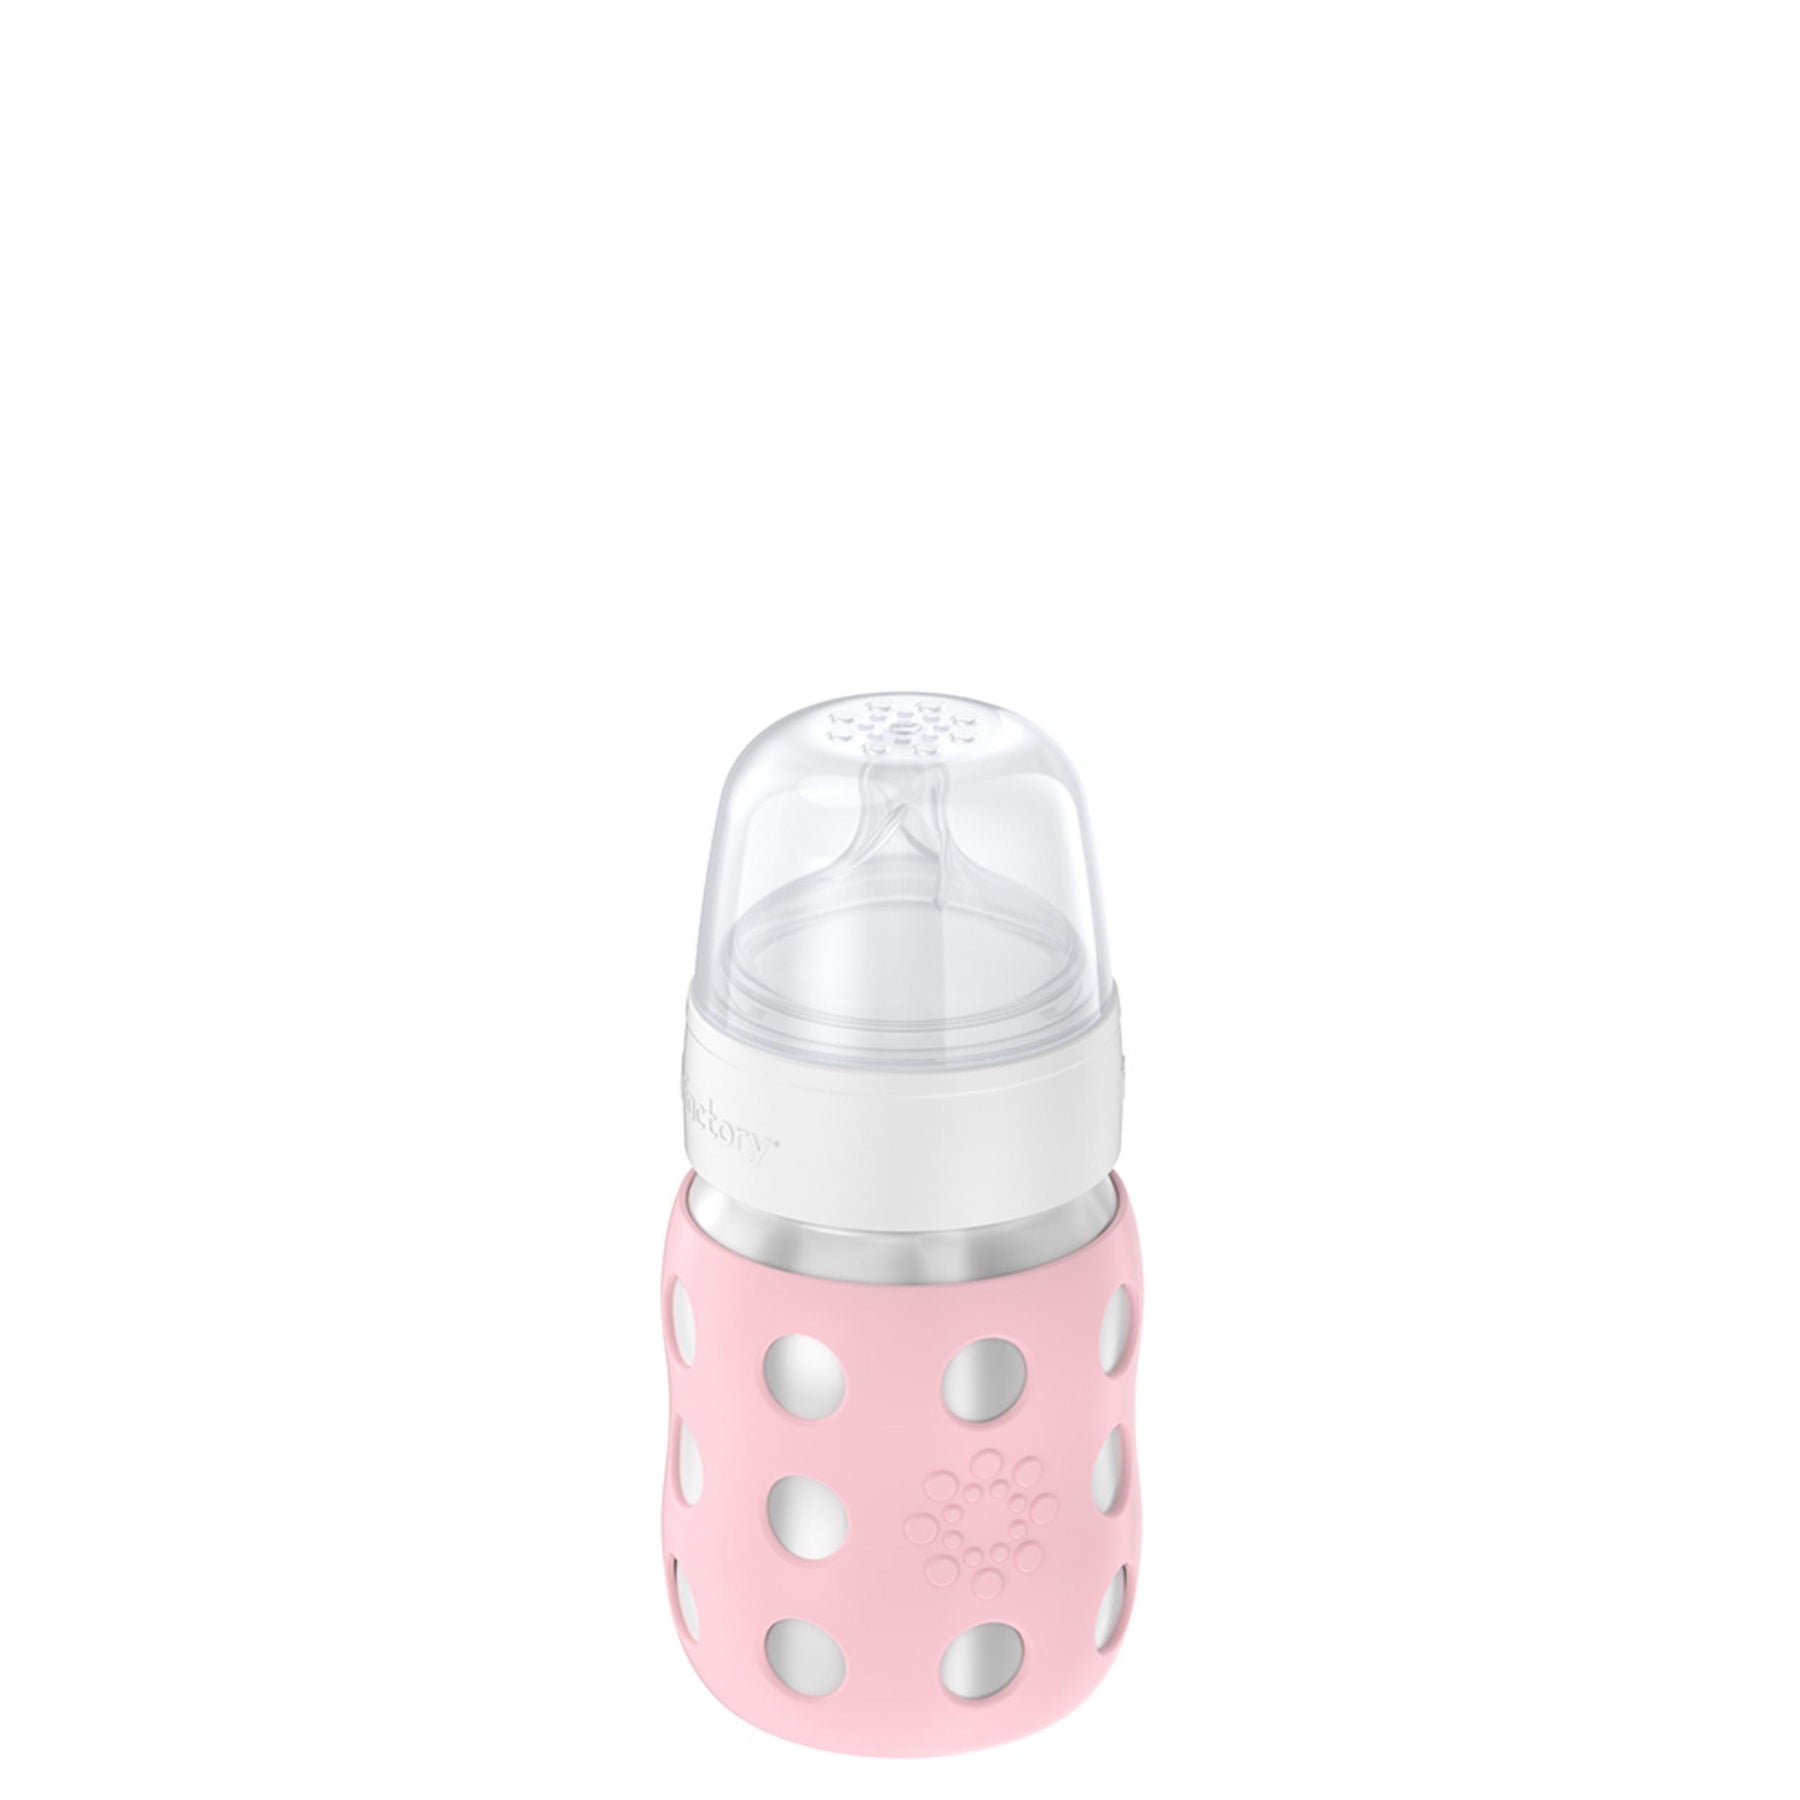 Lifefactory 8 oz Stainless Steel Baby Bottle with Straw Cap, Cantalope